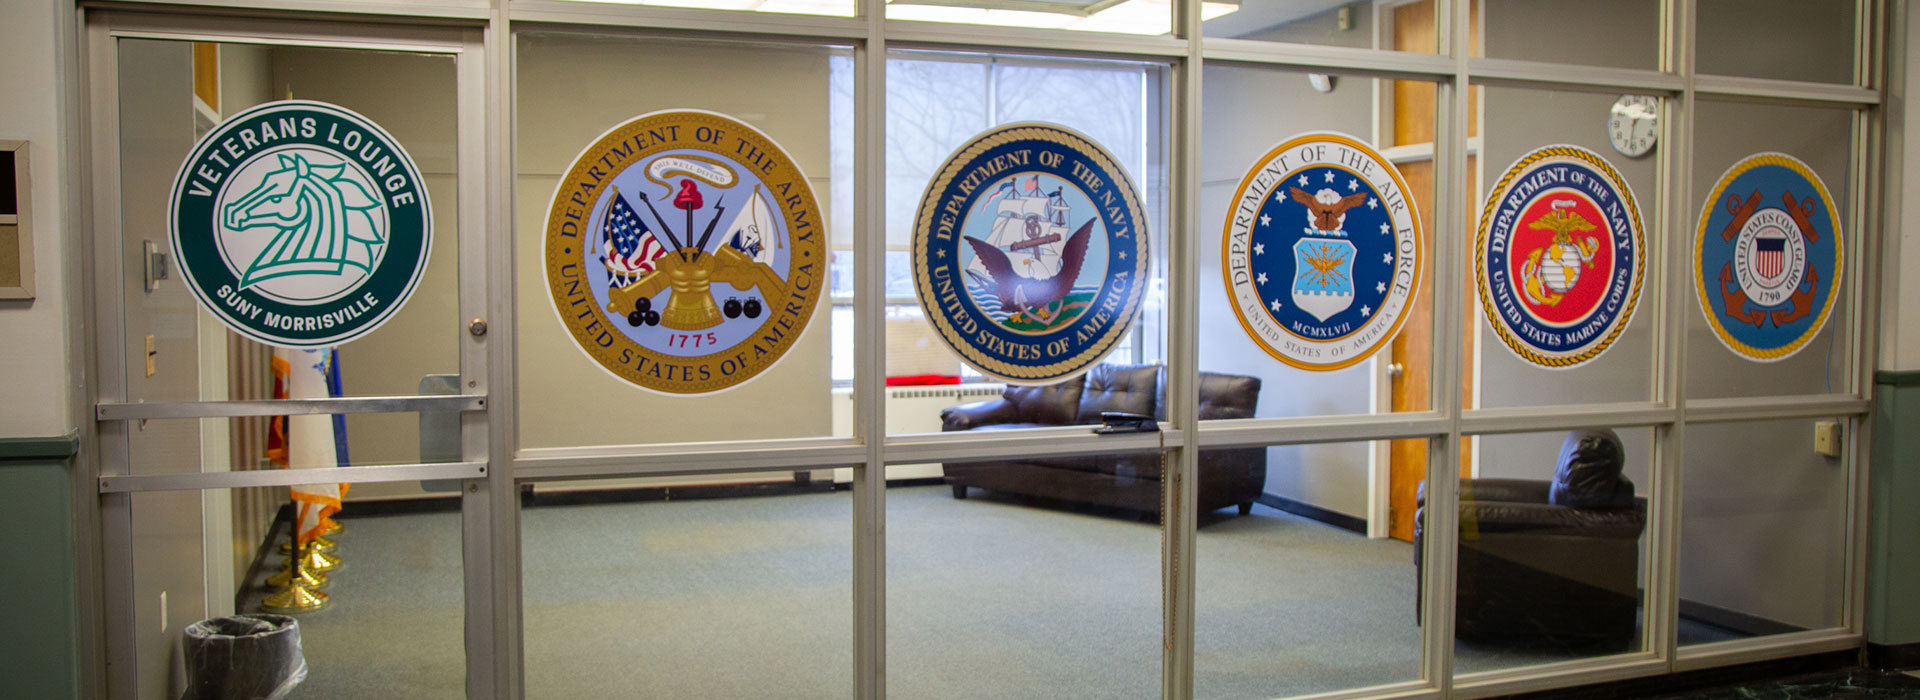 Recently, SUNY Morrisville unveiled its new Veterans Lounge, located on the first floor of Galbreath Hall.